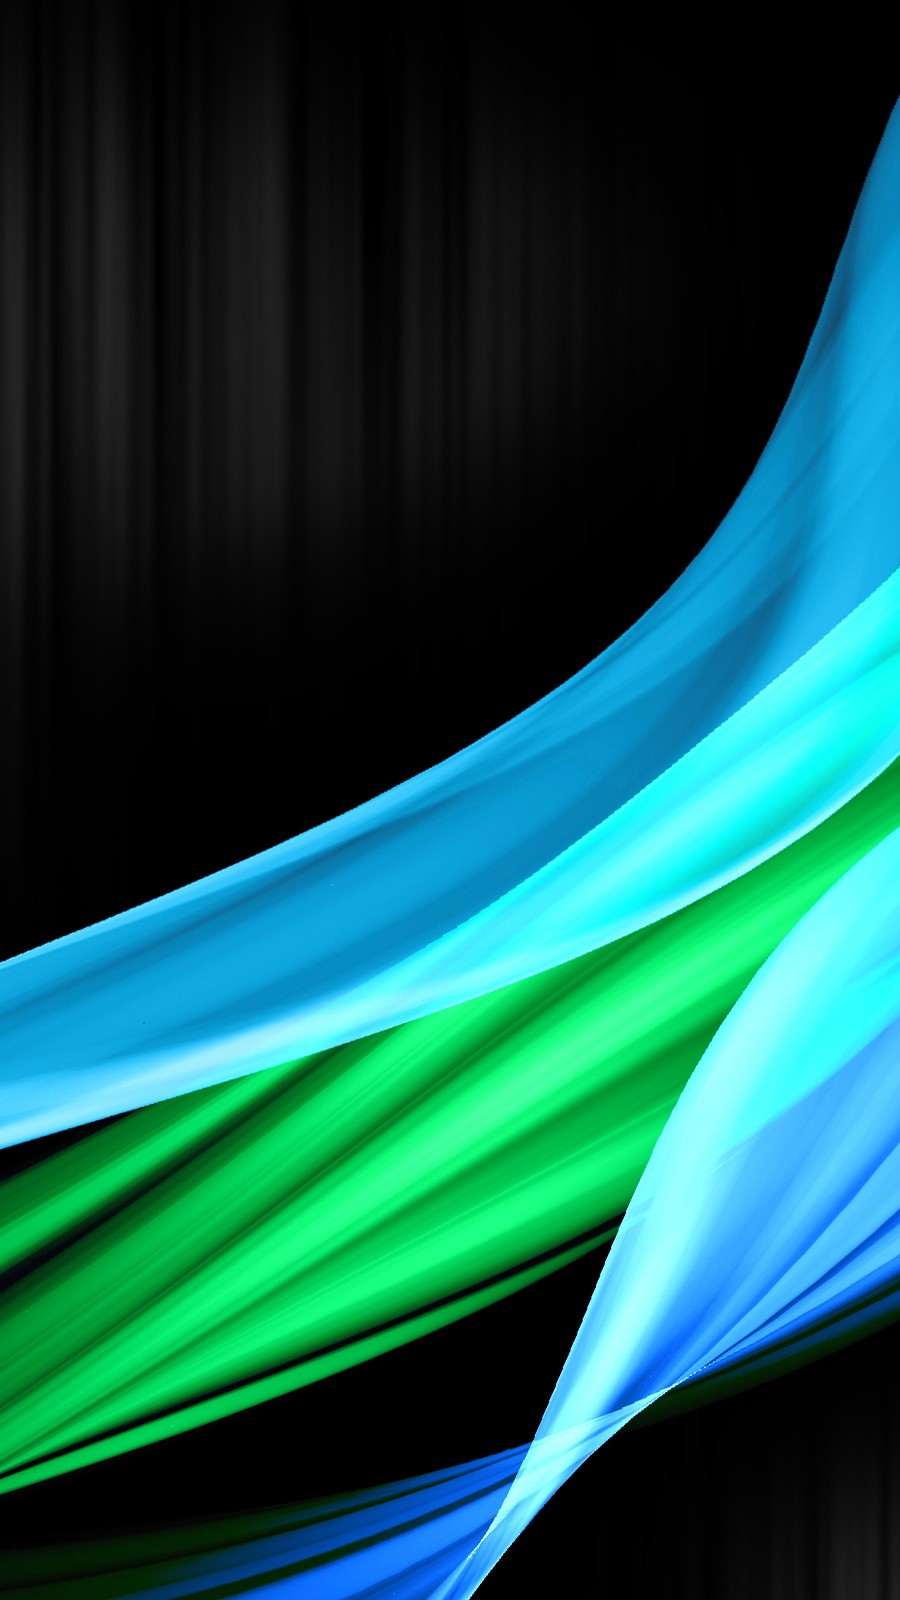 Blue and Green Wave iPhone Wallpaper Free Download